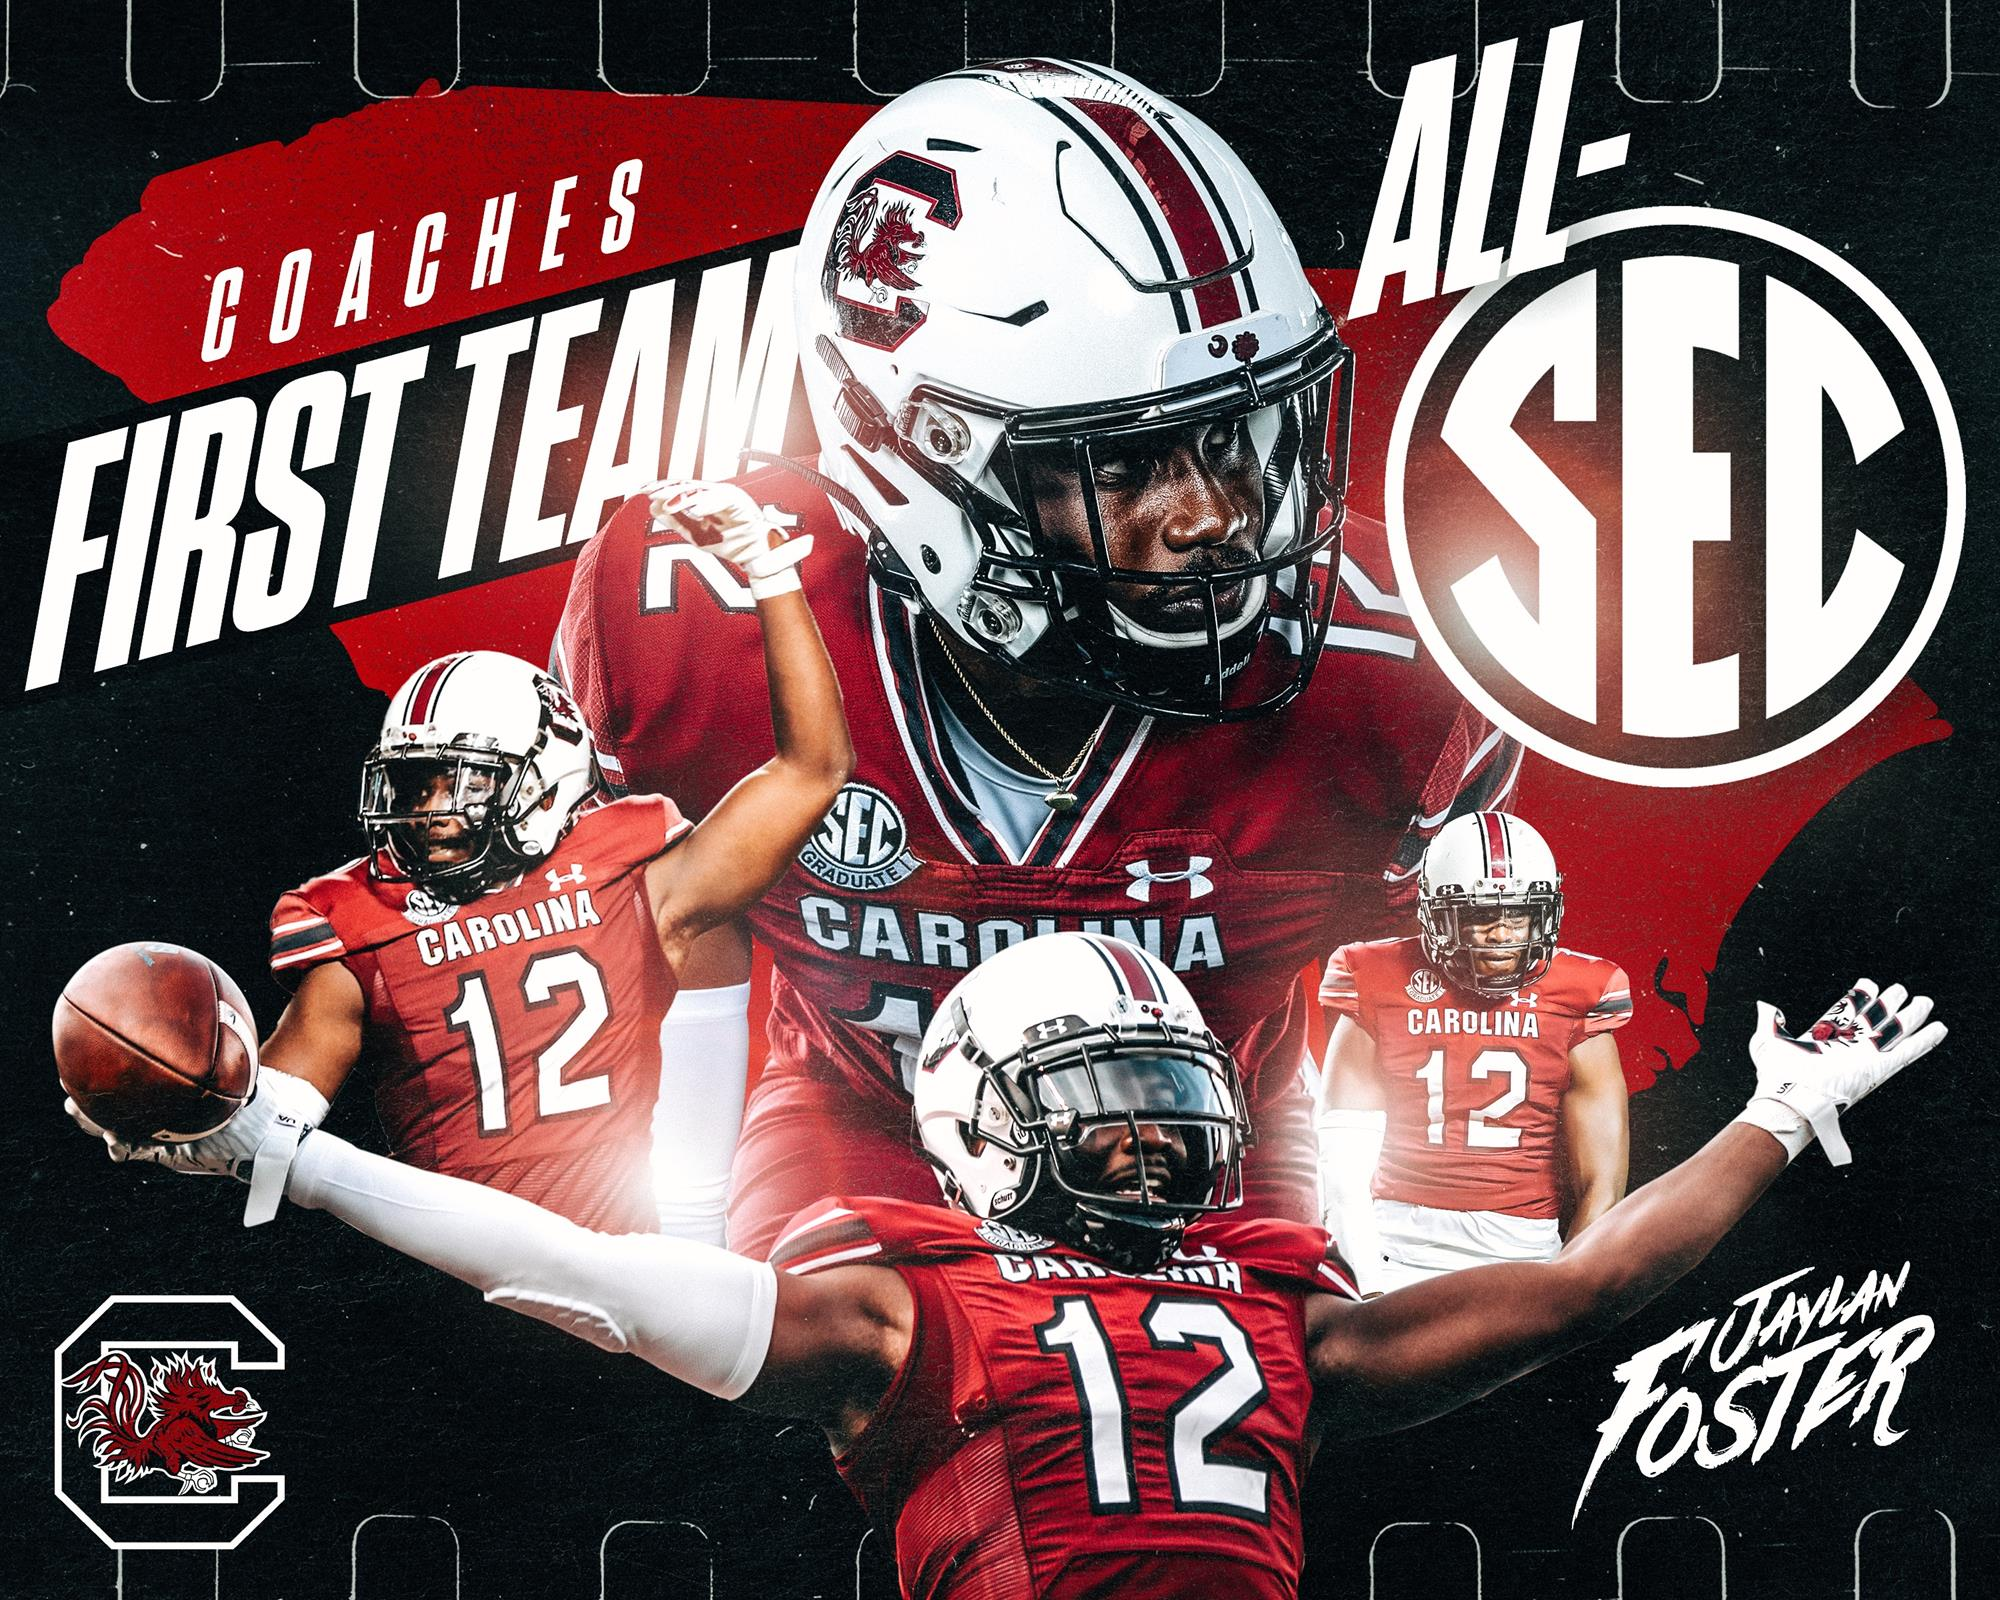 Foster Named First Team All-SEC by League Coaches